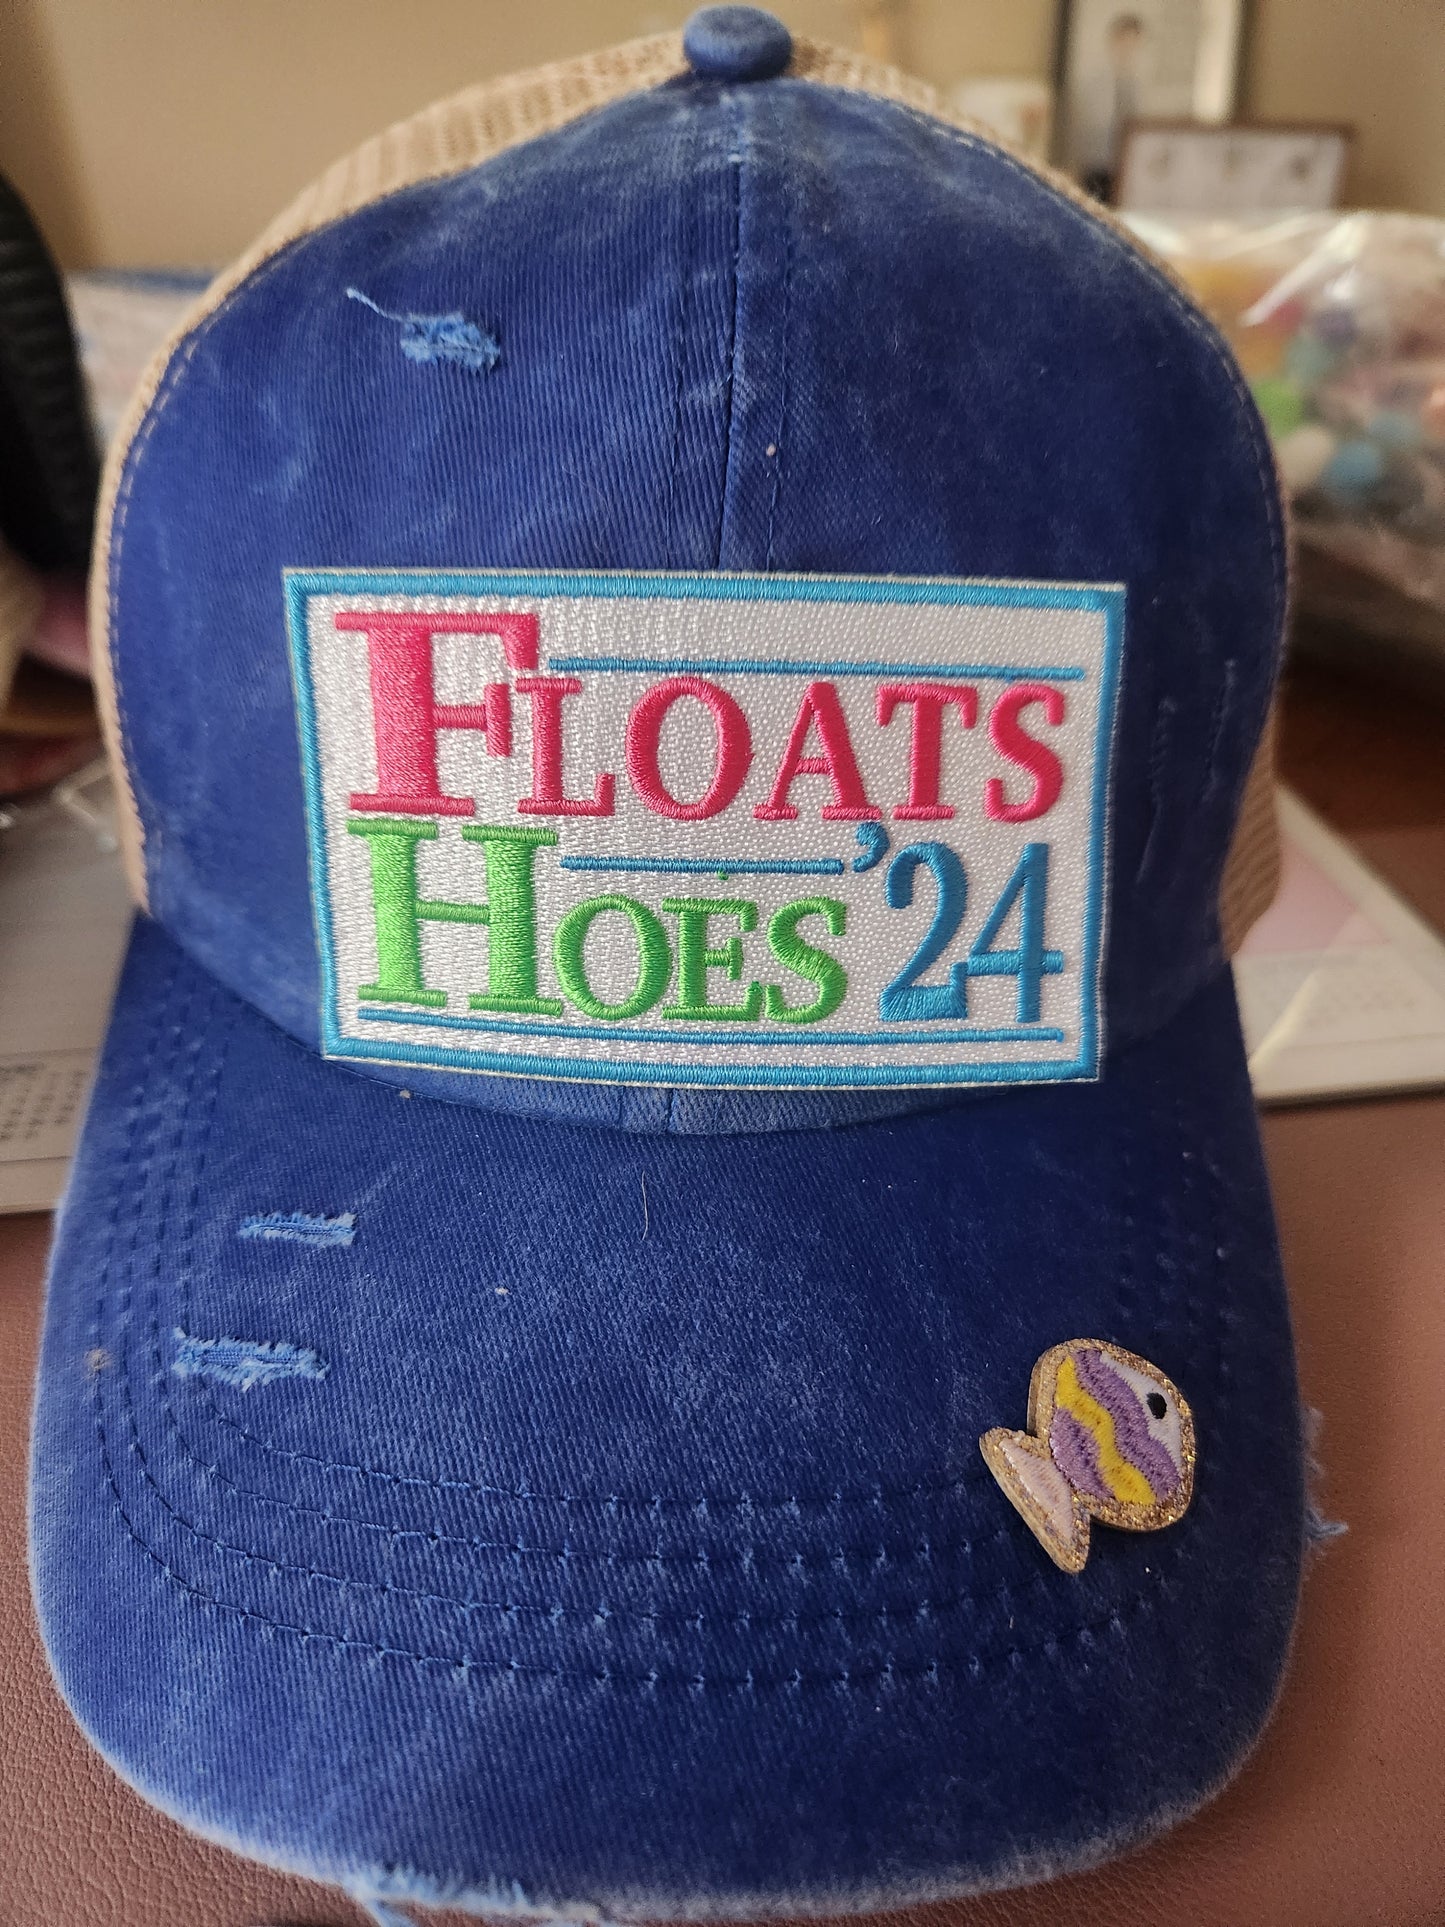 Floats Hoes 24 Iron-On PATCH